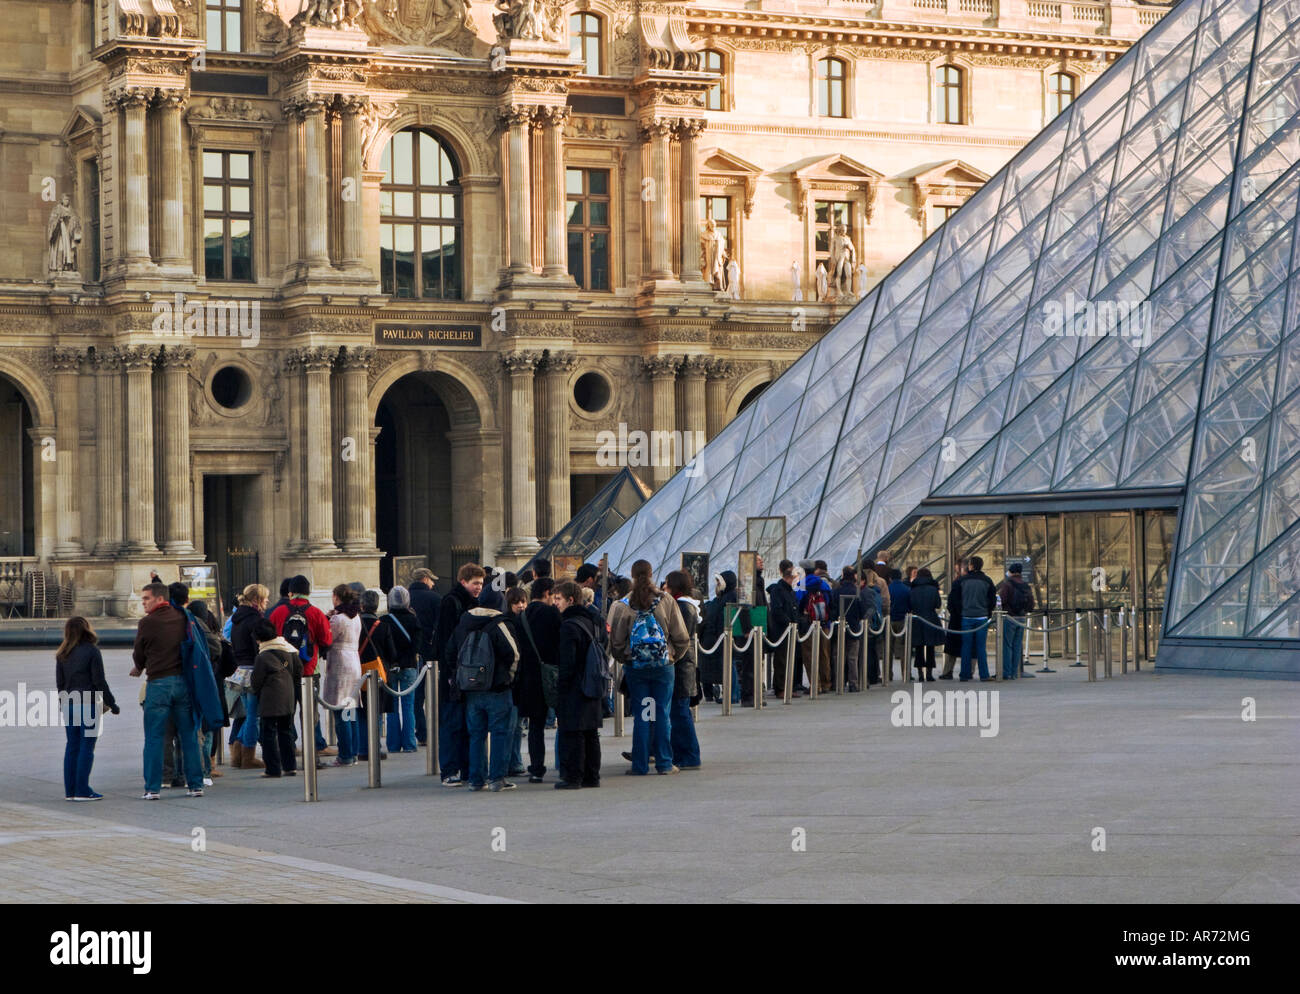 Louvre Museum, Paris, France, Europe - Visitors queue up early in the morning at the Louvre Pyramid entrance Stock Photo